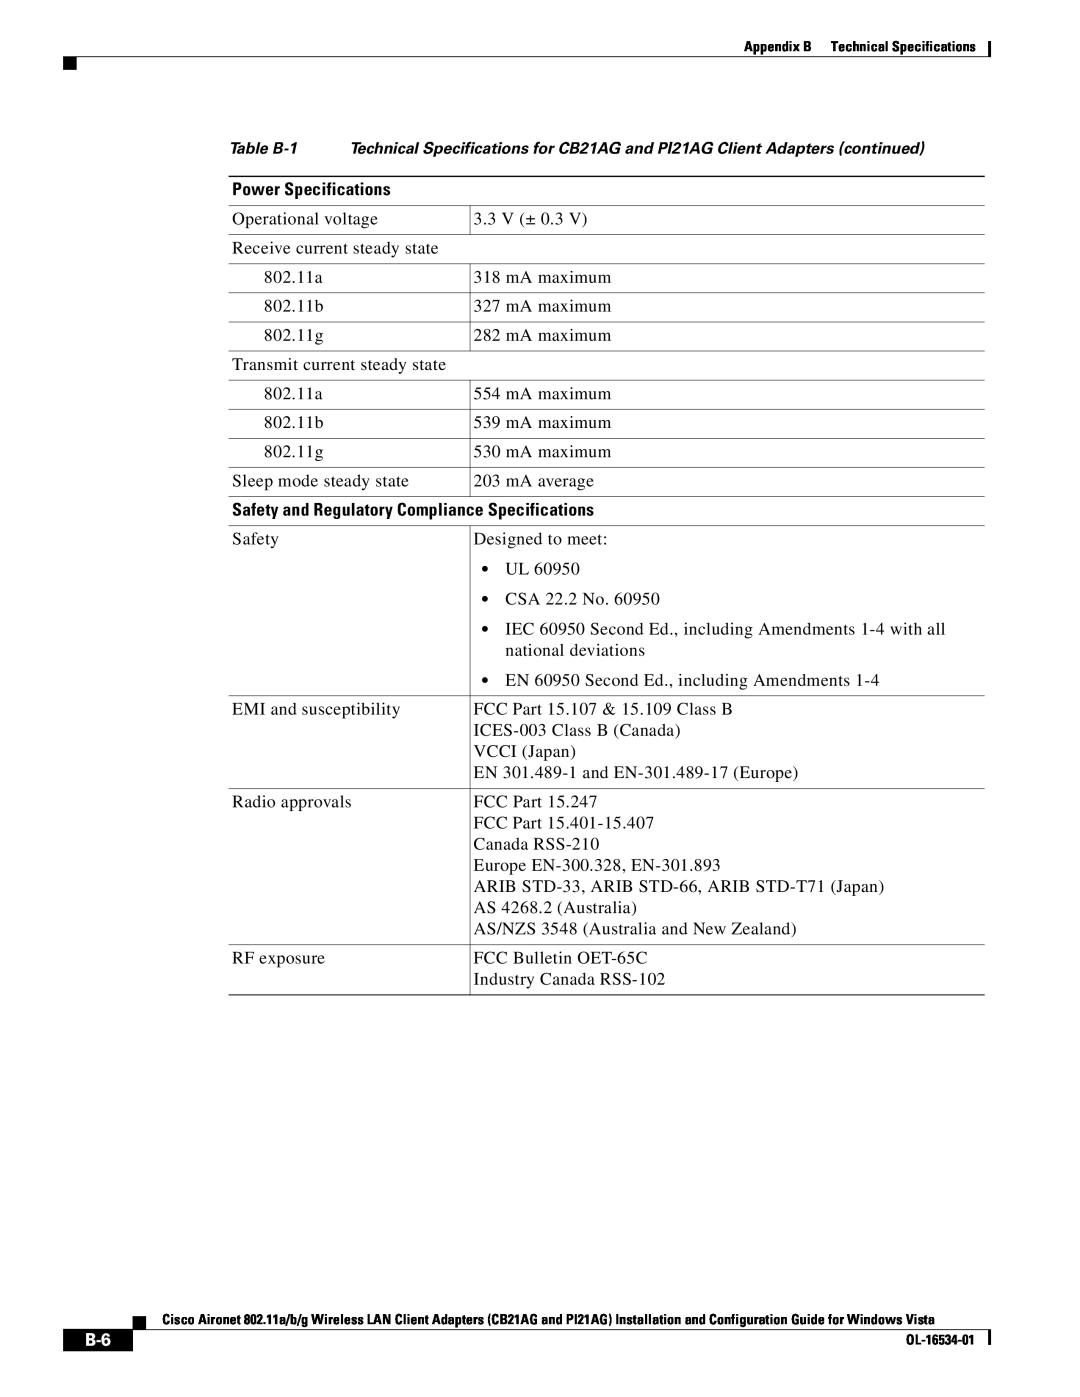 Cisco Systems PI21AG, CB21AG manual Power Specifications, Safety and Regulatory Compliance Specifications 